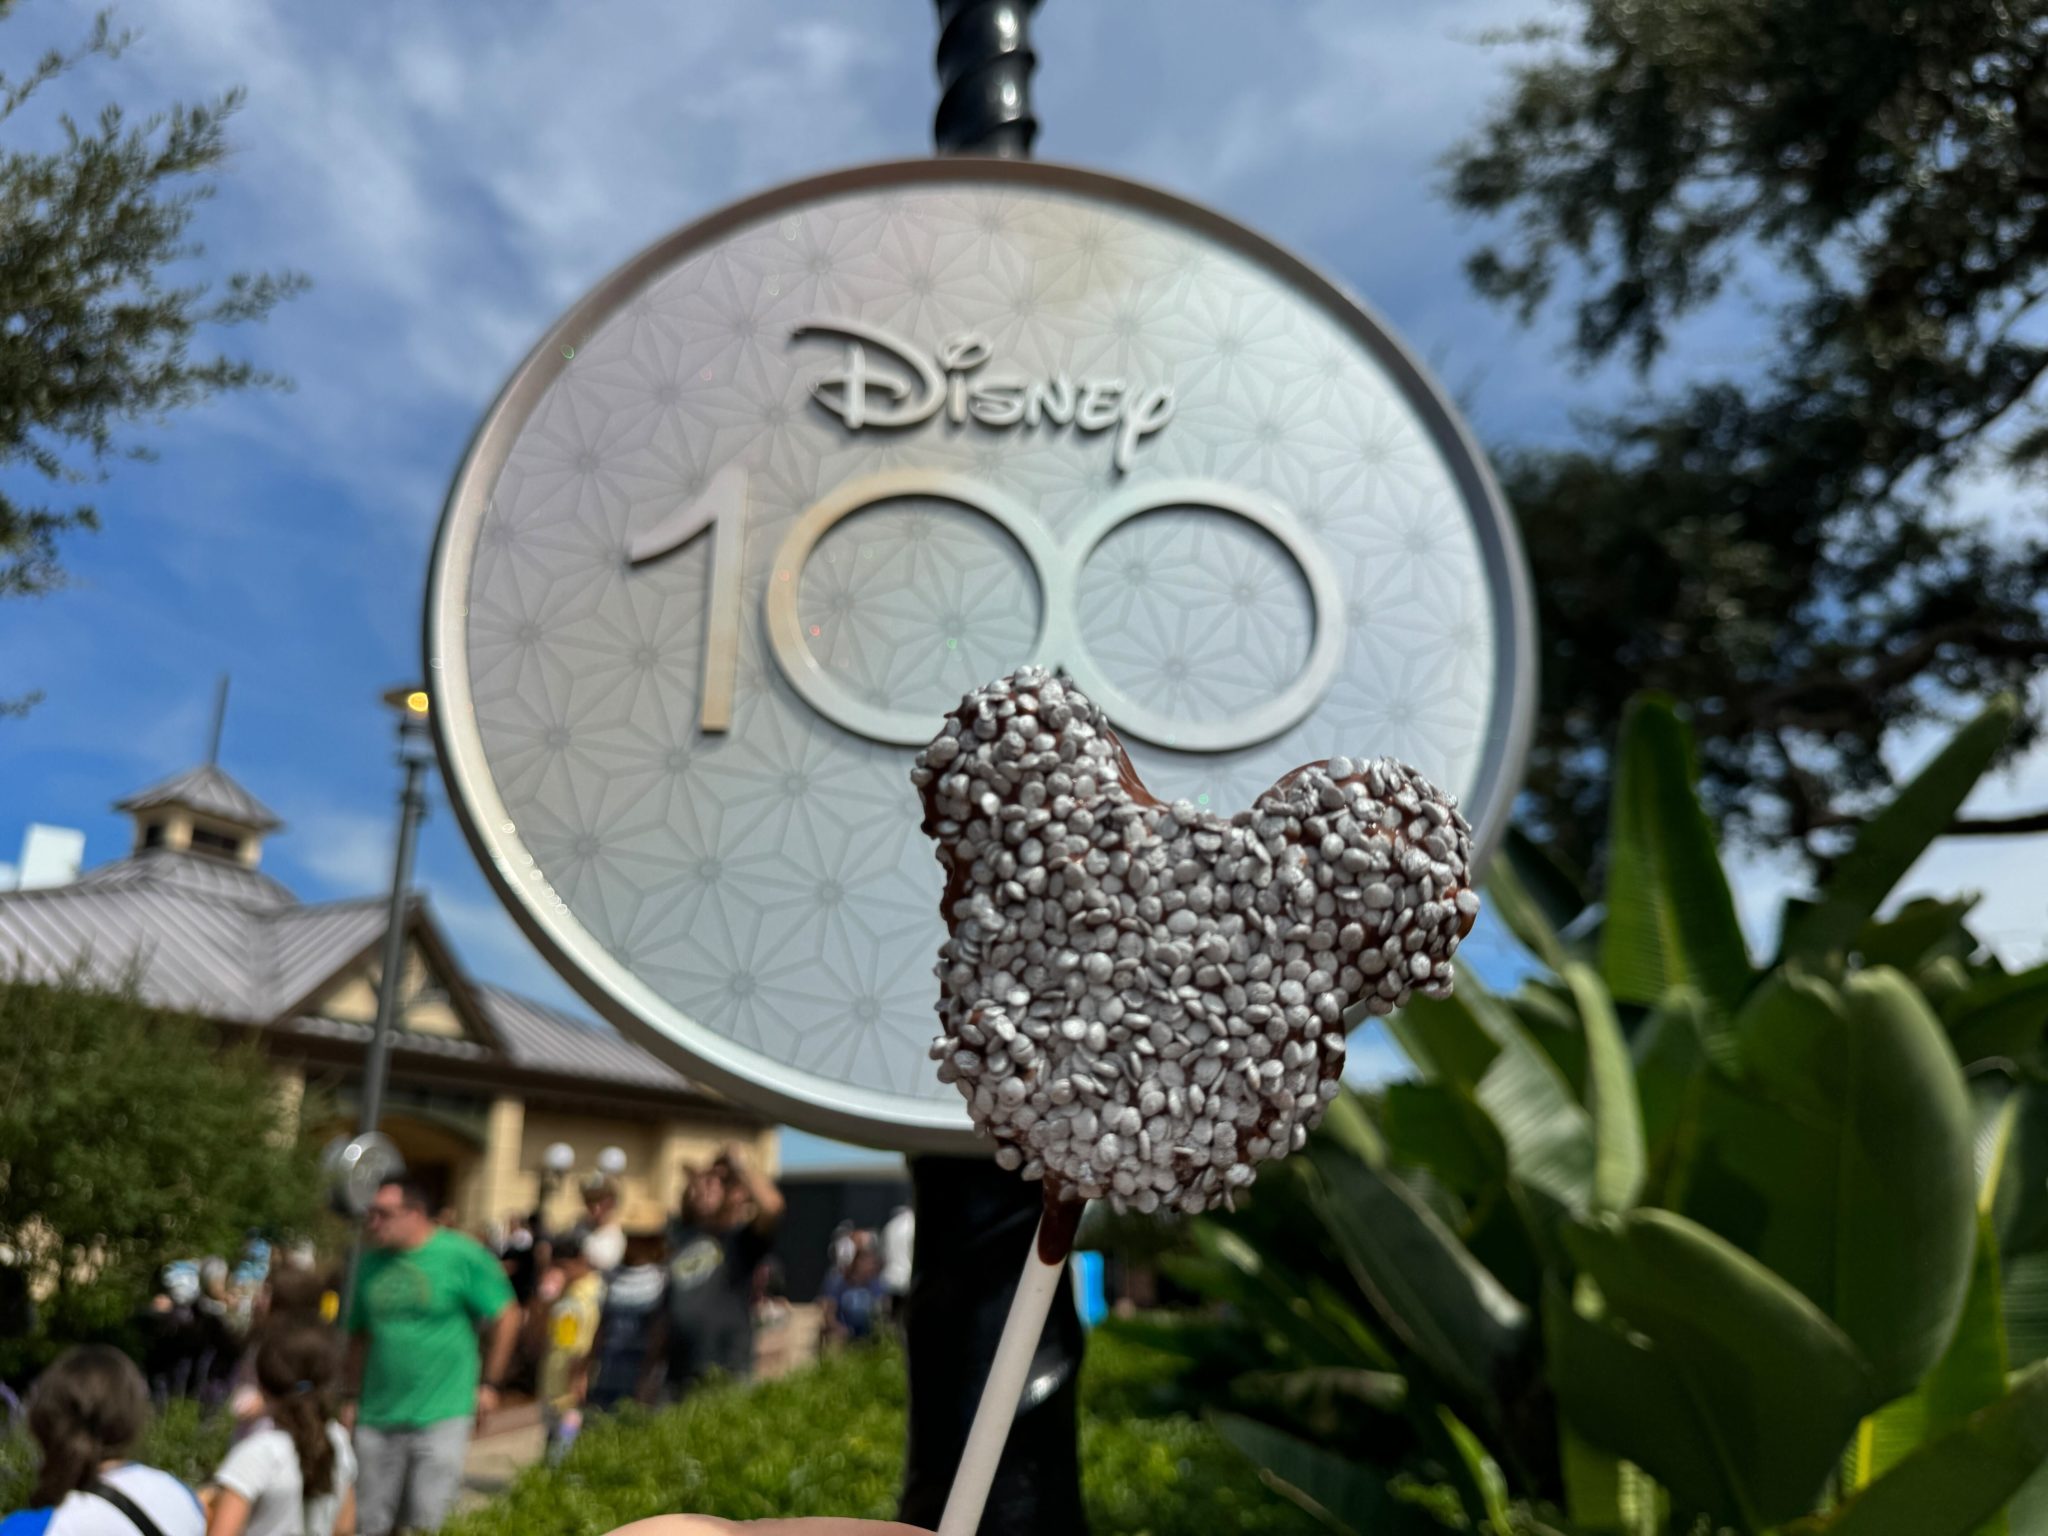 REVIEW New Frozen Treats Delight at EPCOT's New Swirled Showcase